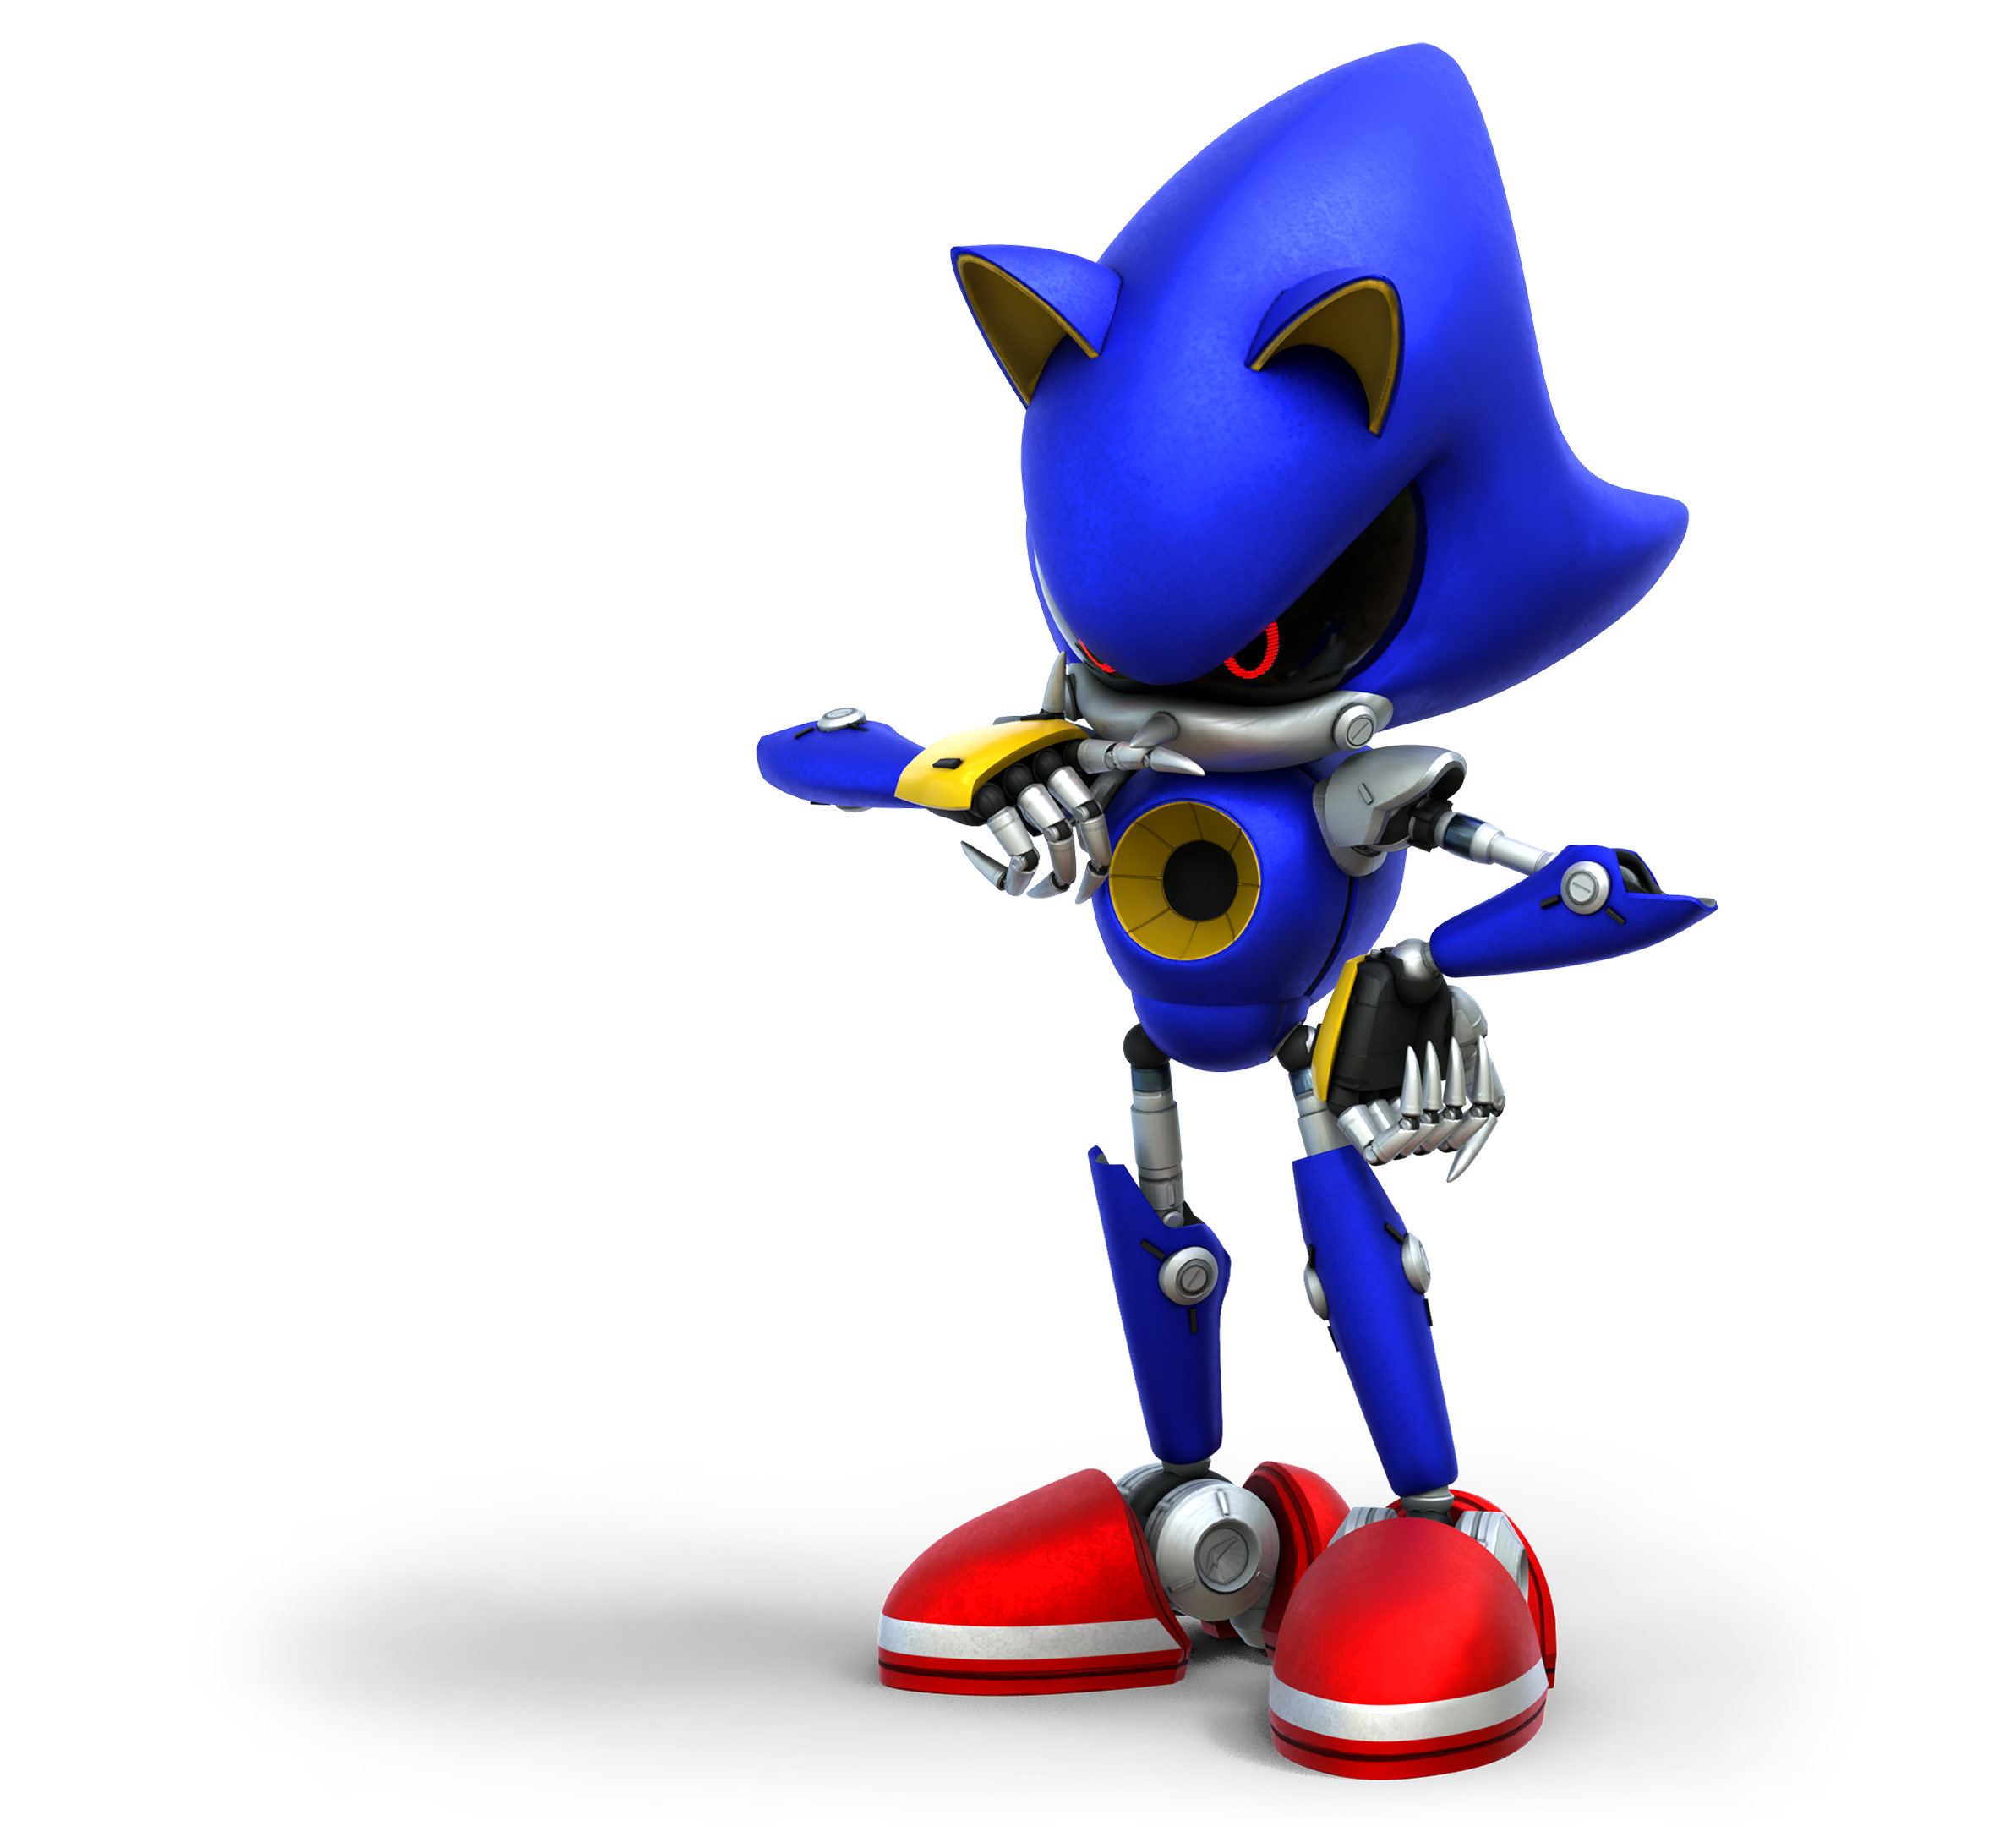 Metal Sonic Icon by Zol6199 on DeviantArt